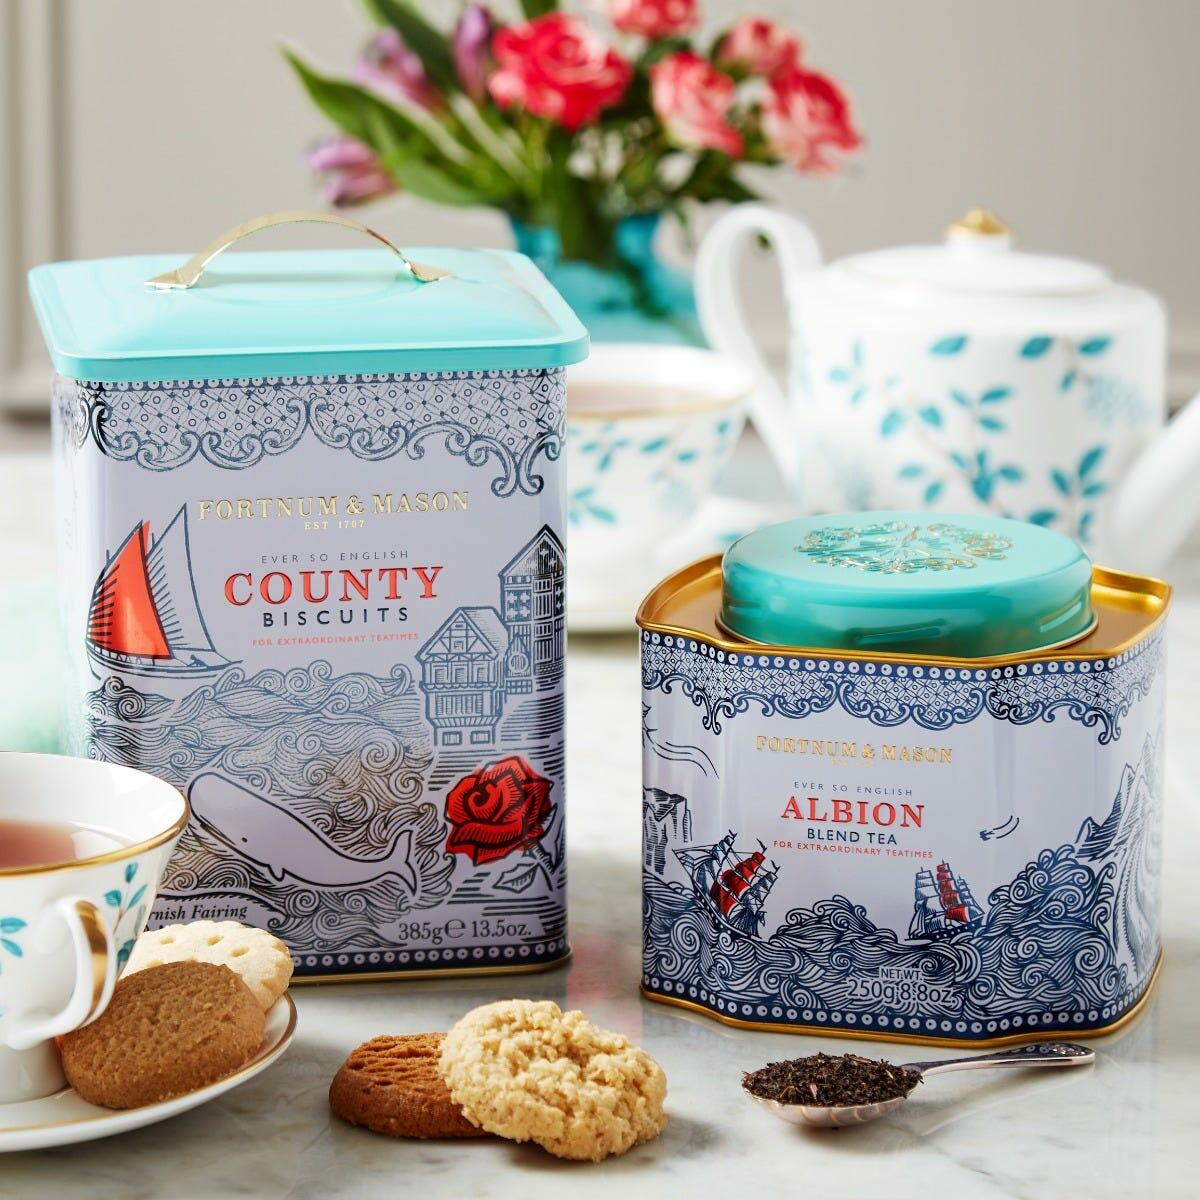 Albion Tea & County Biscuits Selection, Fortnum & Mason